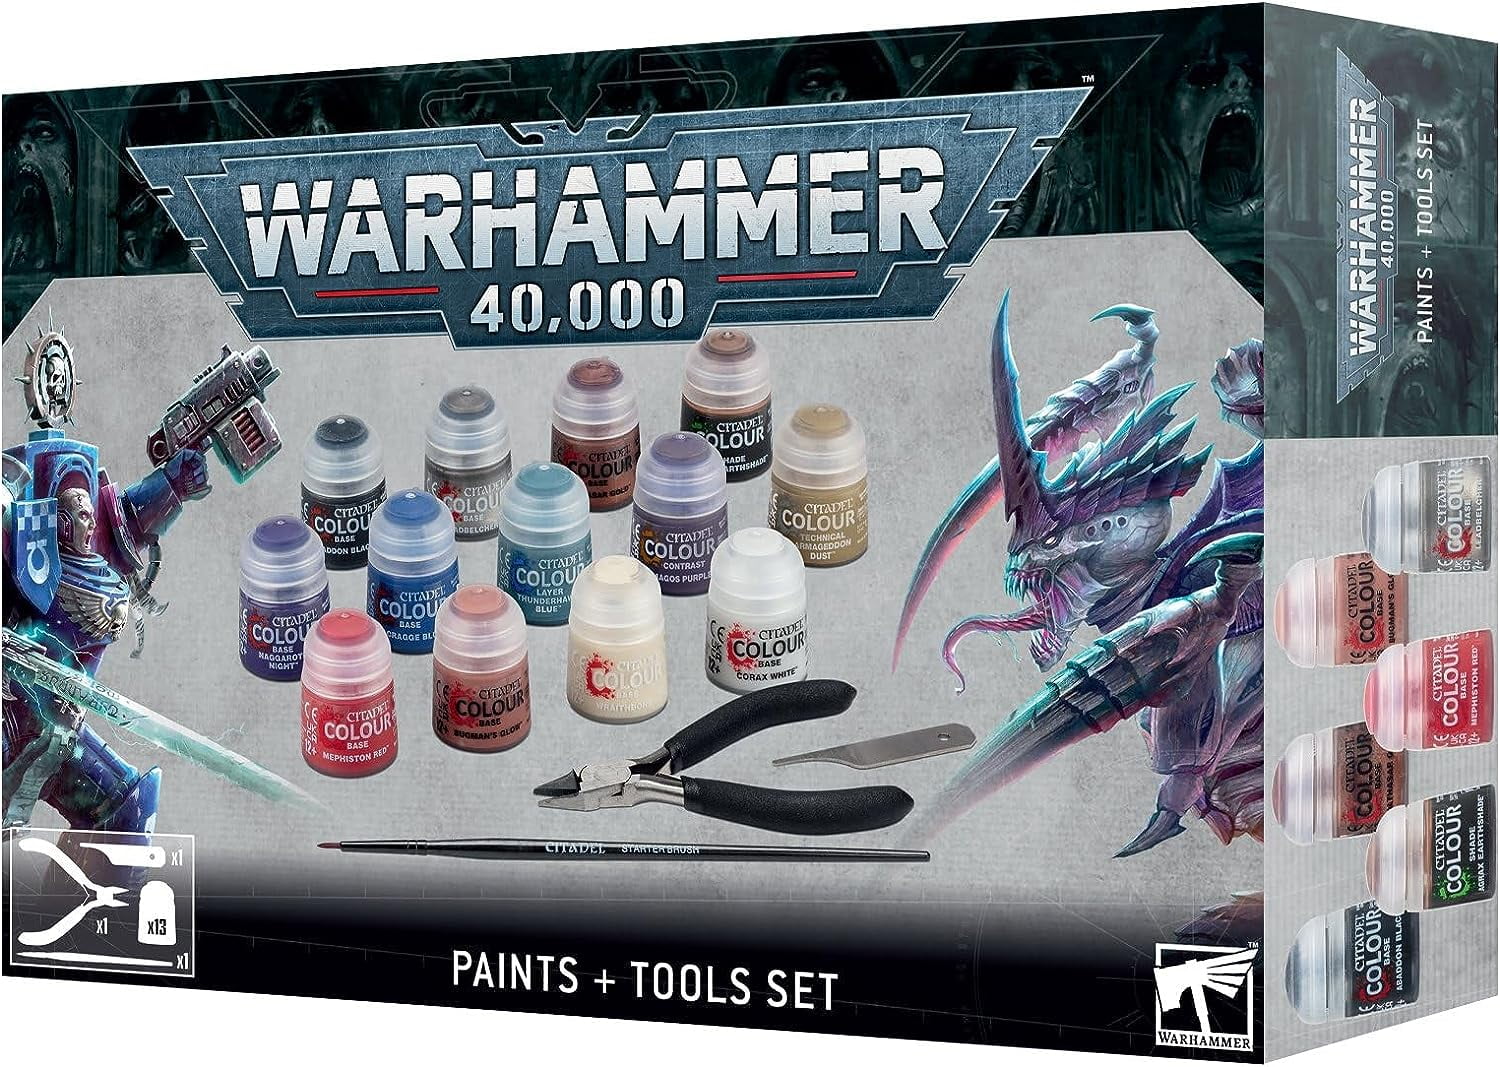 The Army Painter and Wargames Delivered Miniature Acrylic Paint Set, 116  Model Paints for Plastic Models